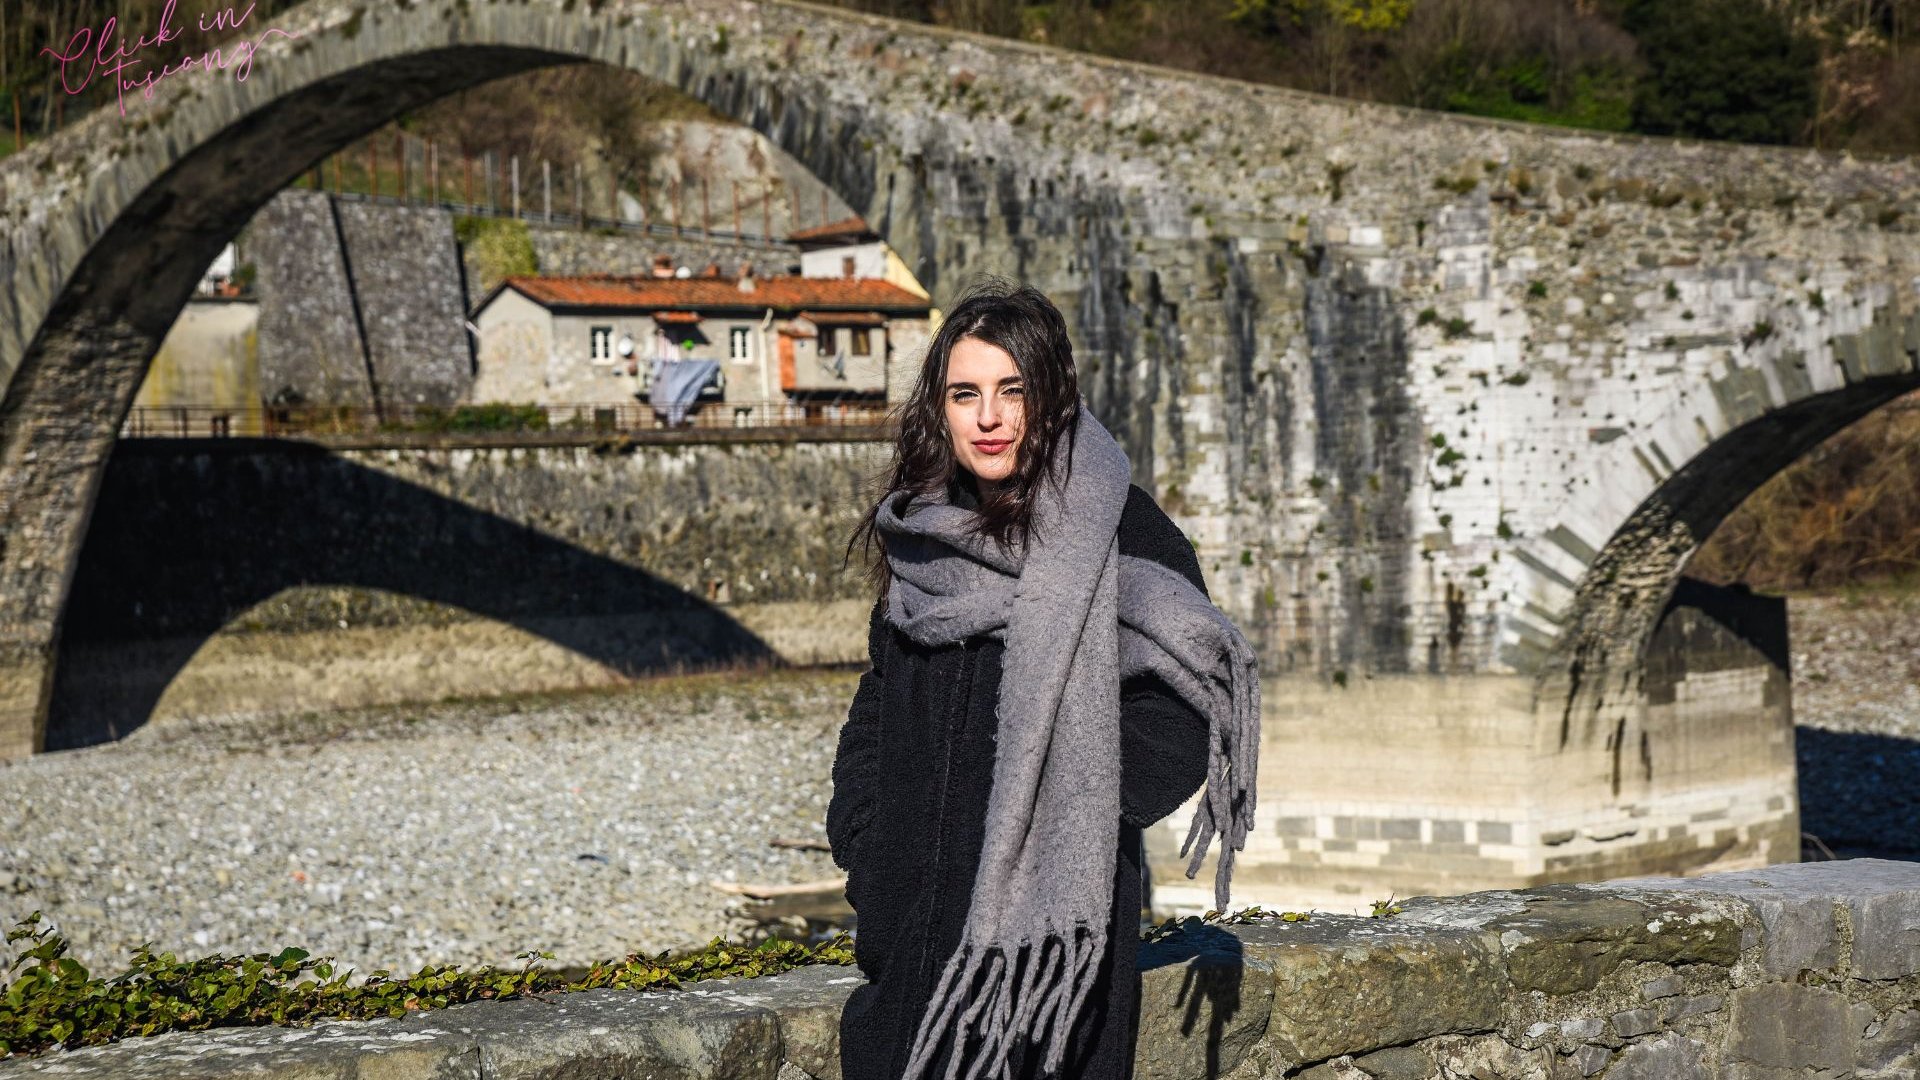 Car tour to visit the Garfagnana and immortalize the memories with a professional photoshoot